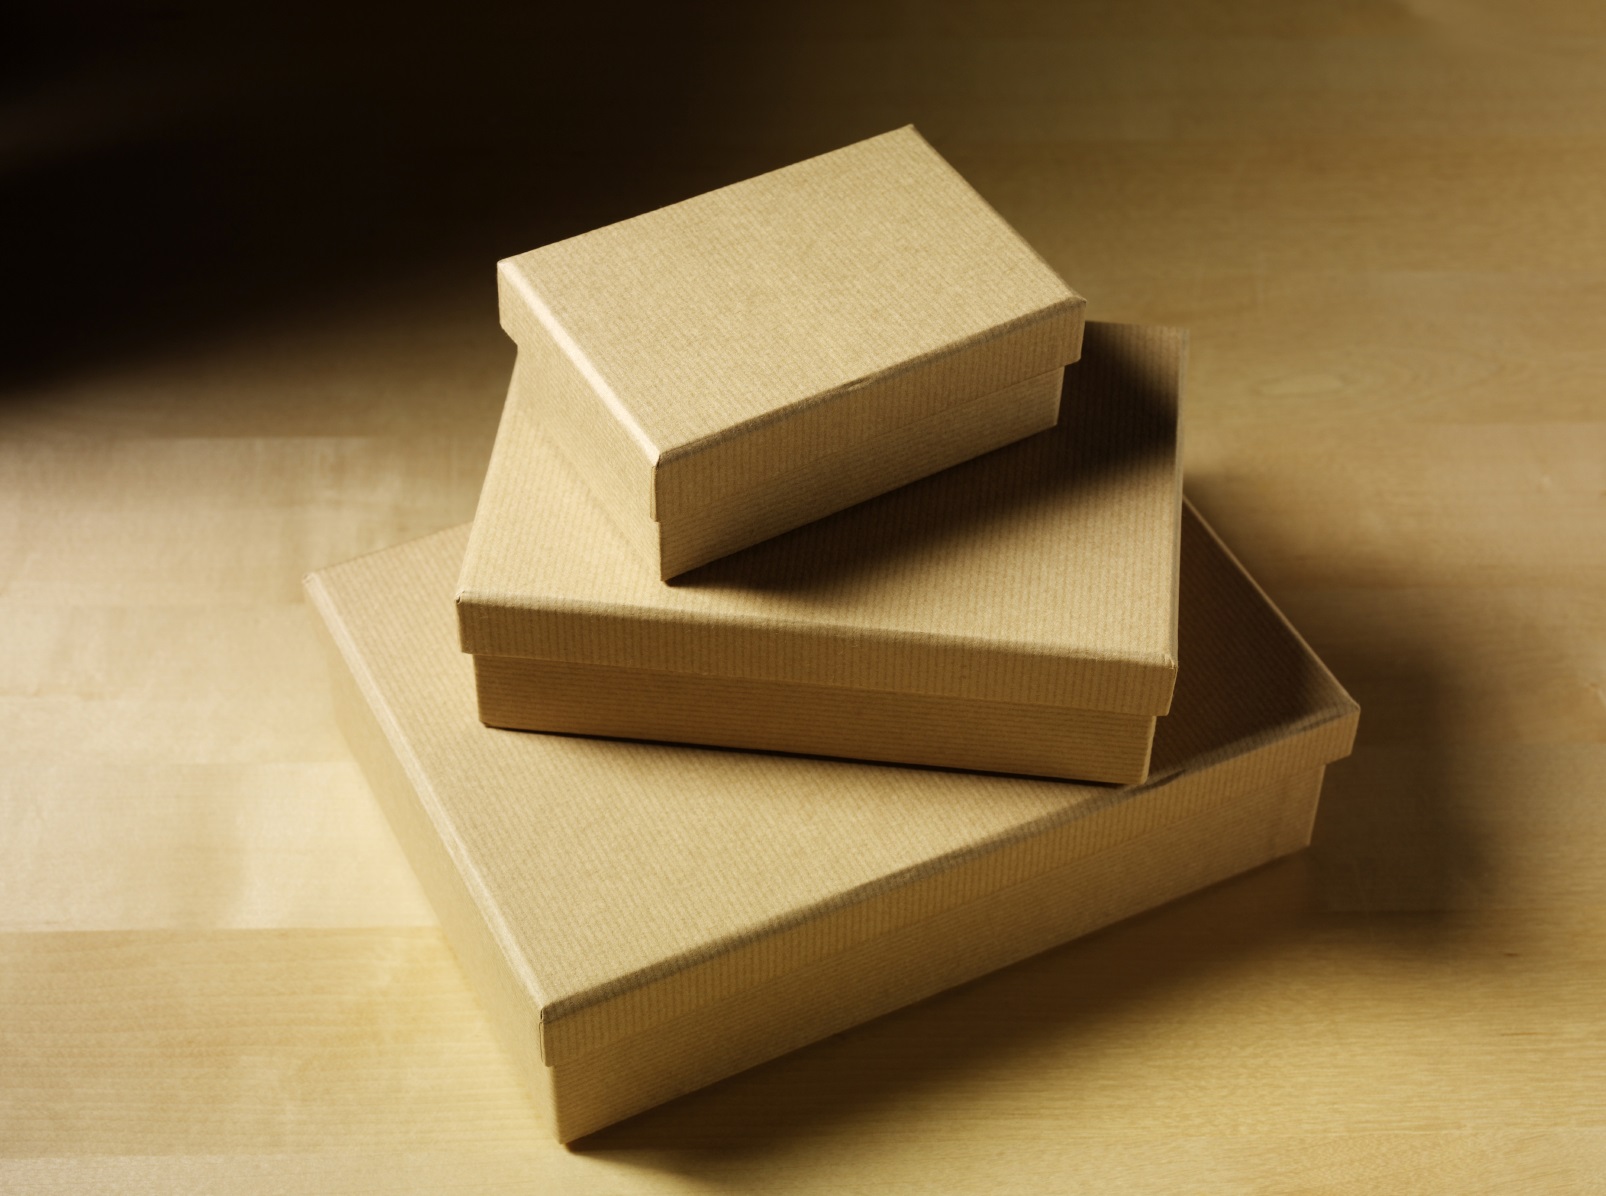 A Guide On All The Benefits Of Folded Carton Packaging That Every Business Owner Should Know